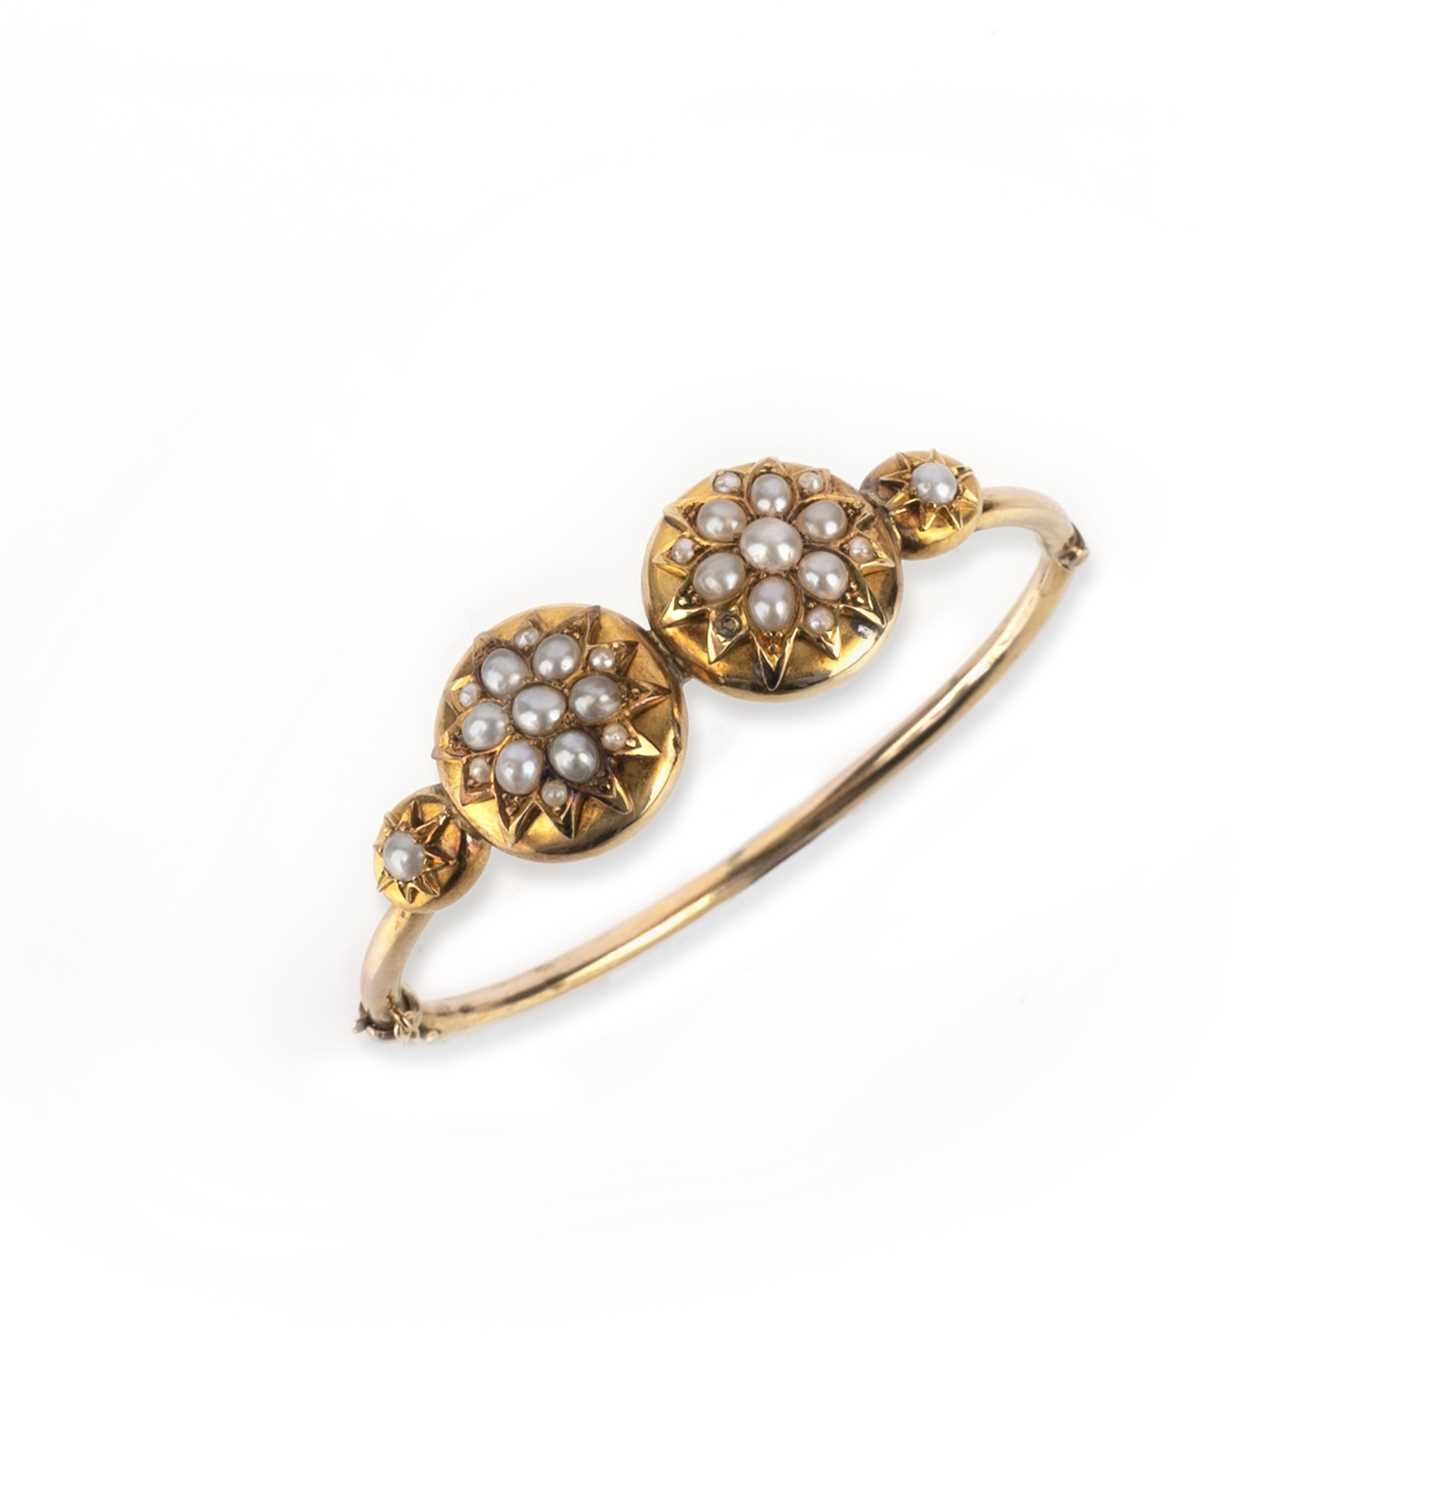 A Victorian gold and half pearl bangle, late 19th century, of hinged design, the front centring on